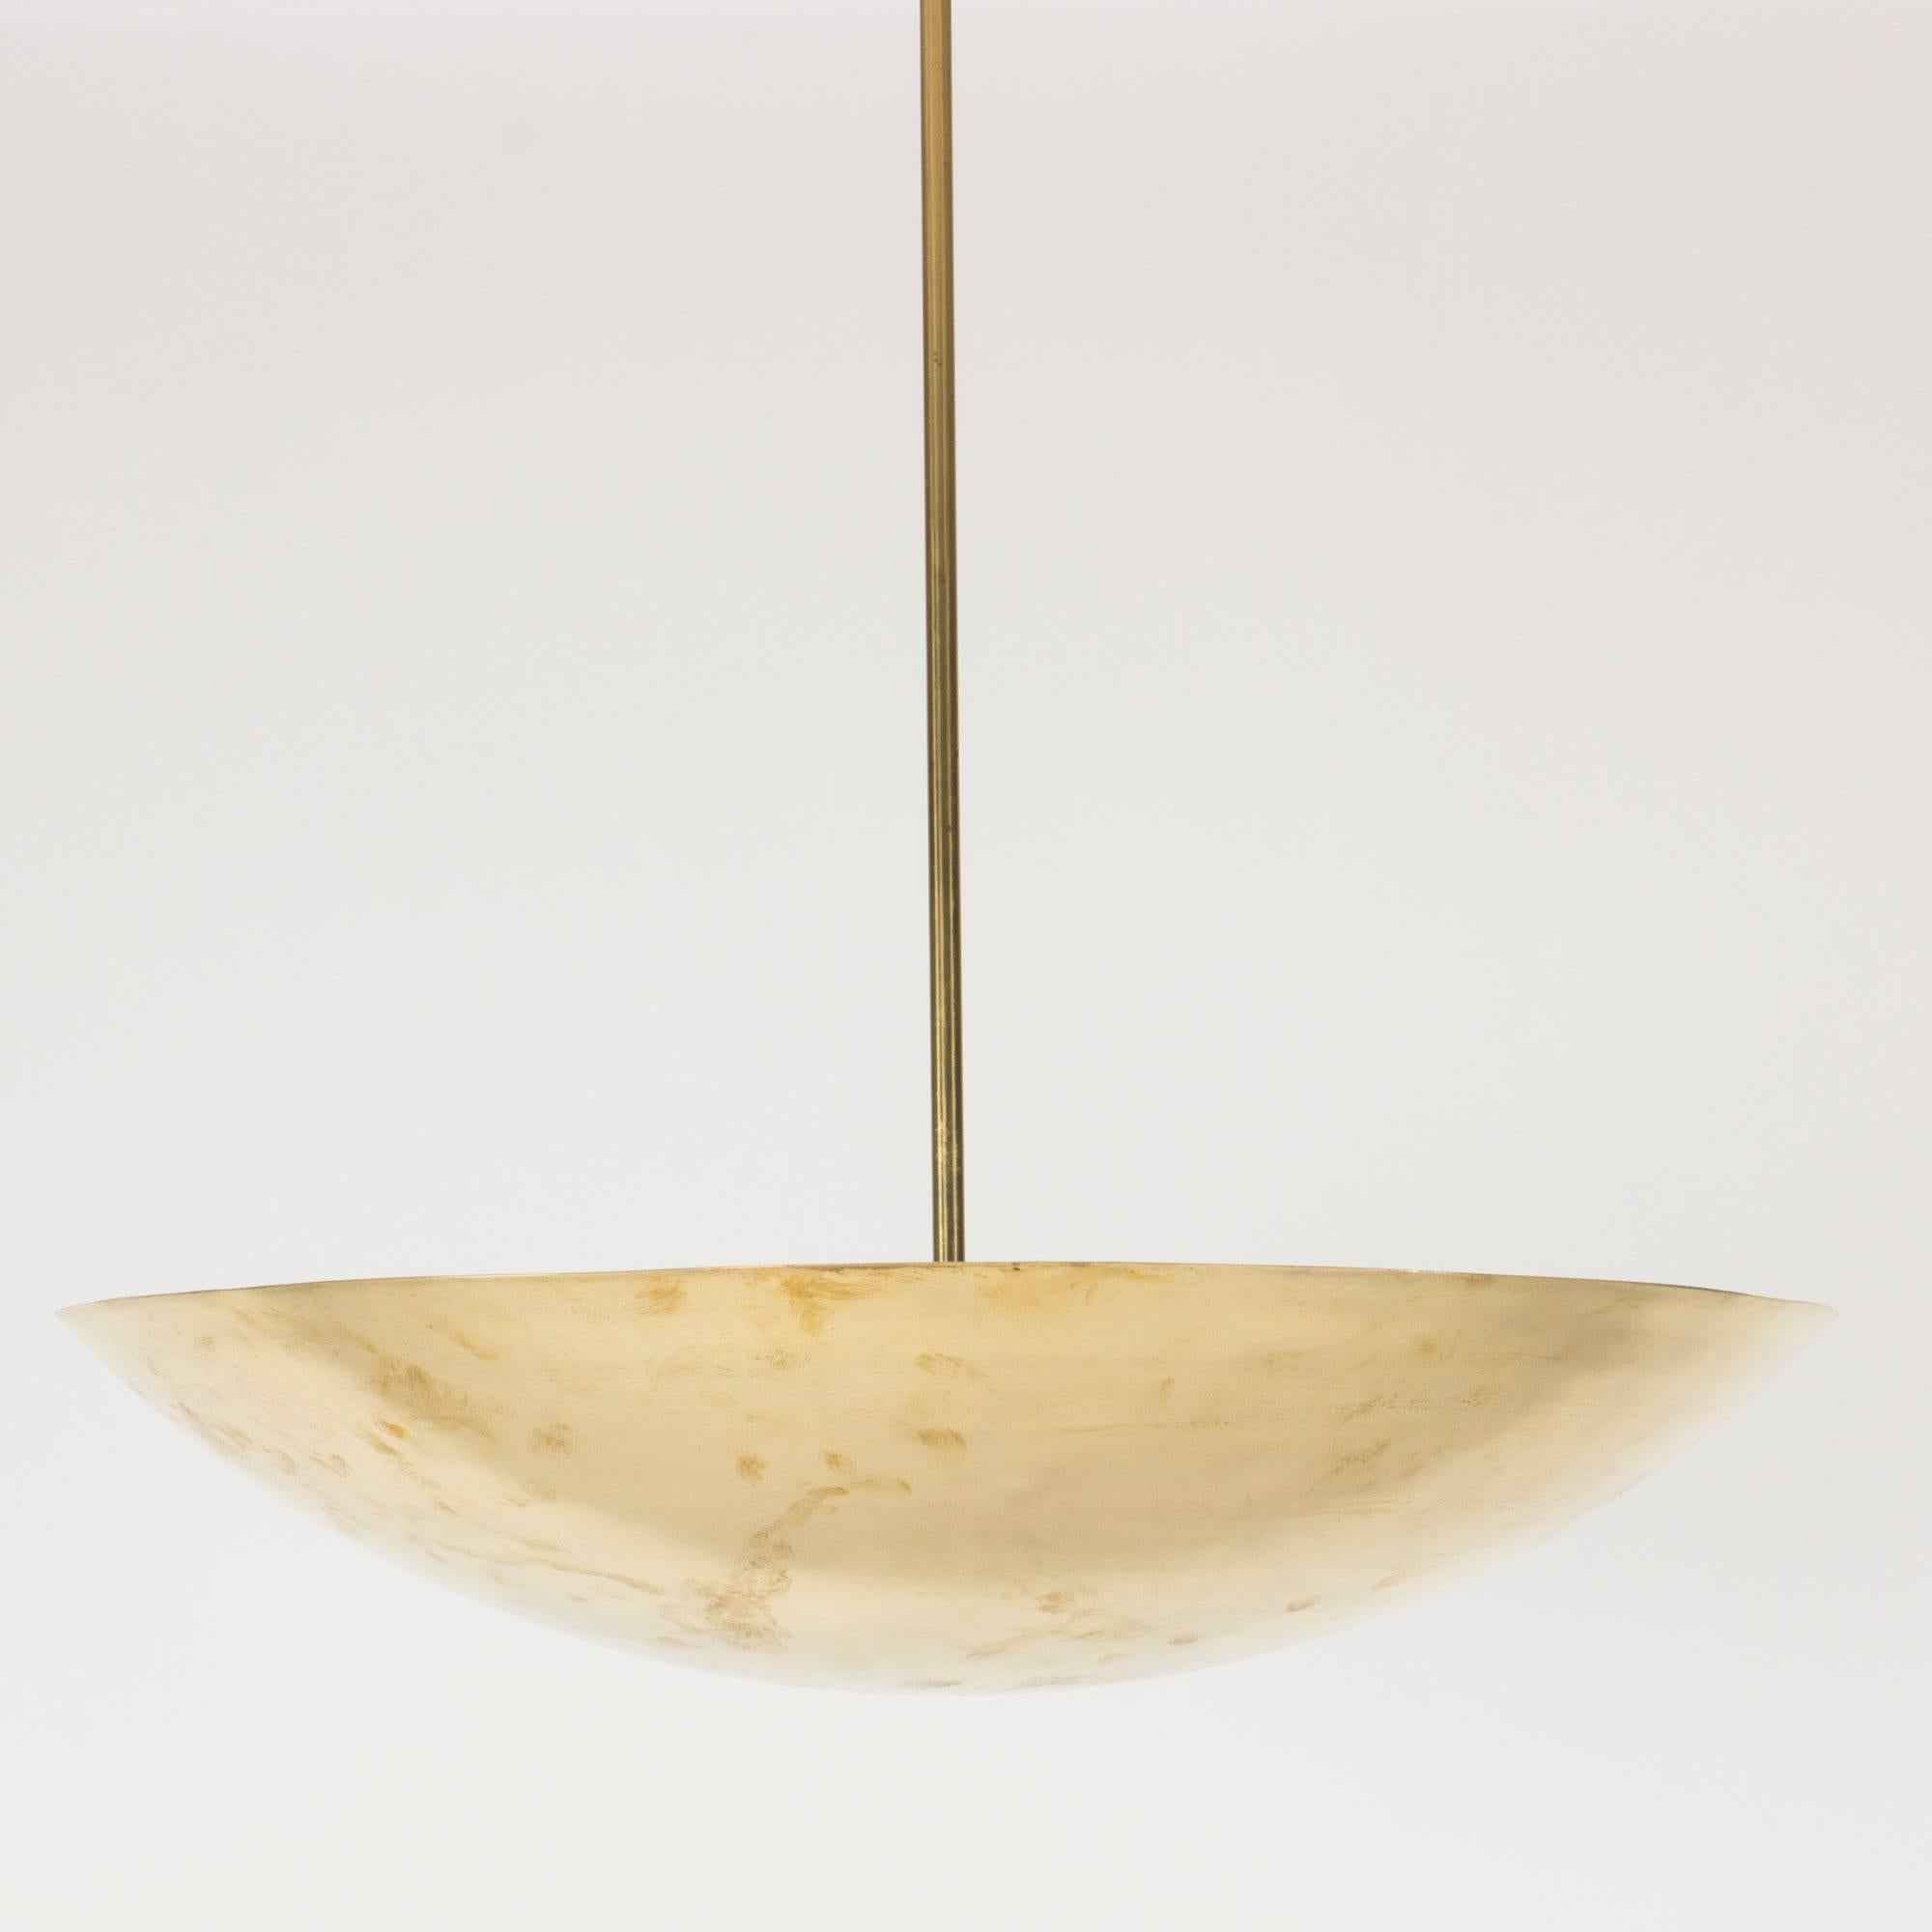 Striking brass ceiling lamp, in a clean, spherical shape that directs the light upwards. Beautiful, shining brass with a subtle hand-finished look. Brass pole with a loop for suspension at the end.